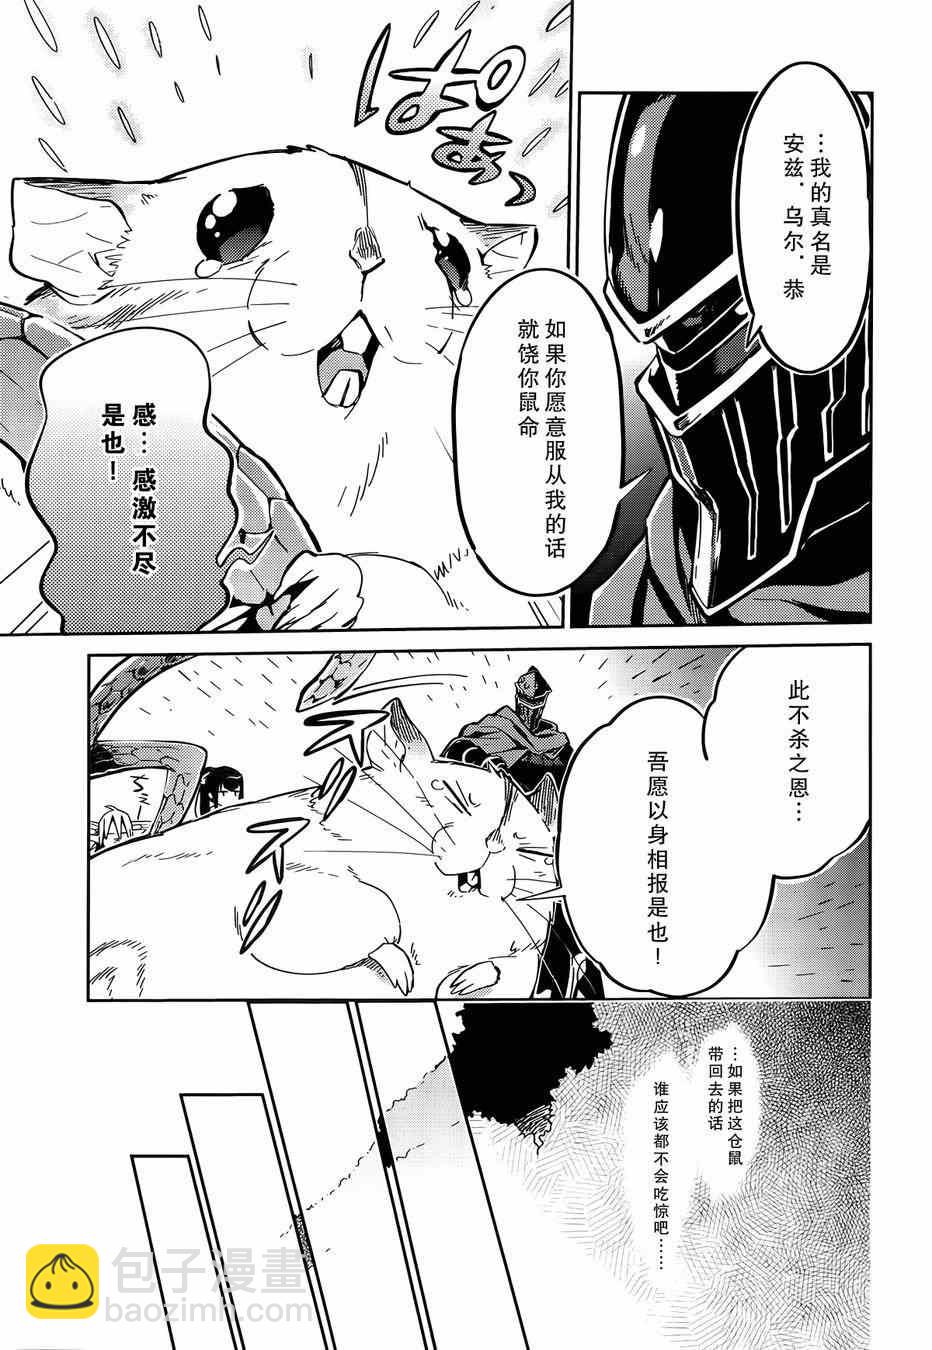 OVERLORD - 第7话 - 2